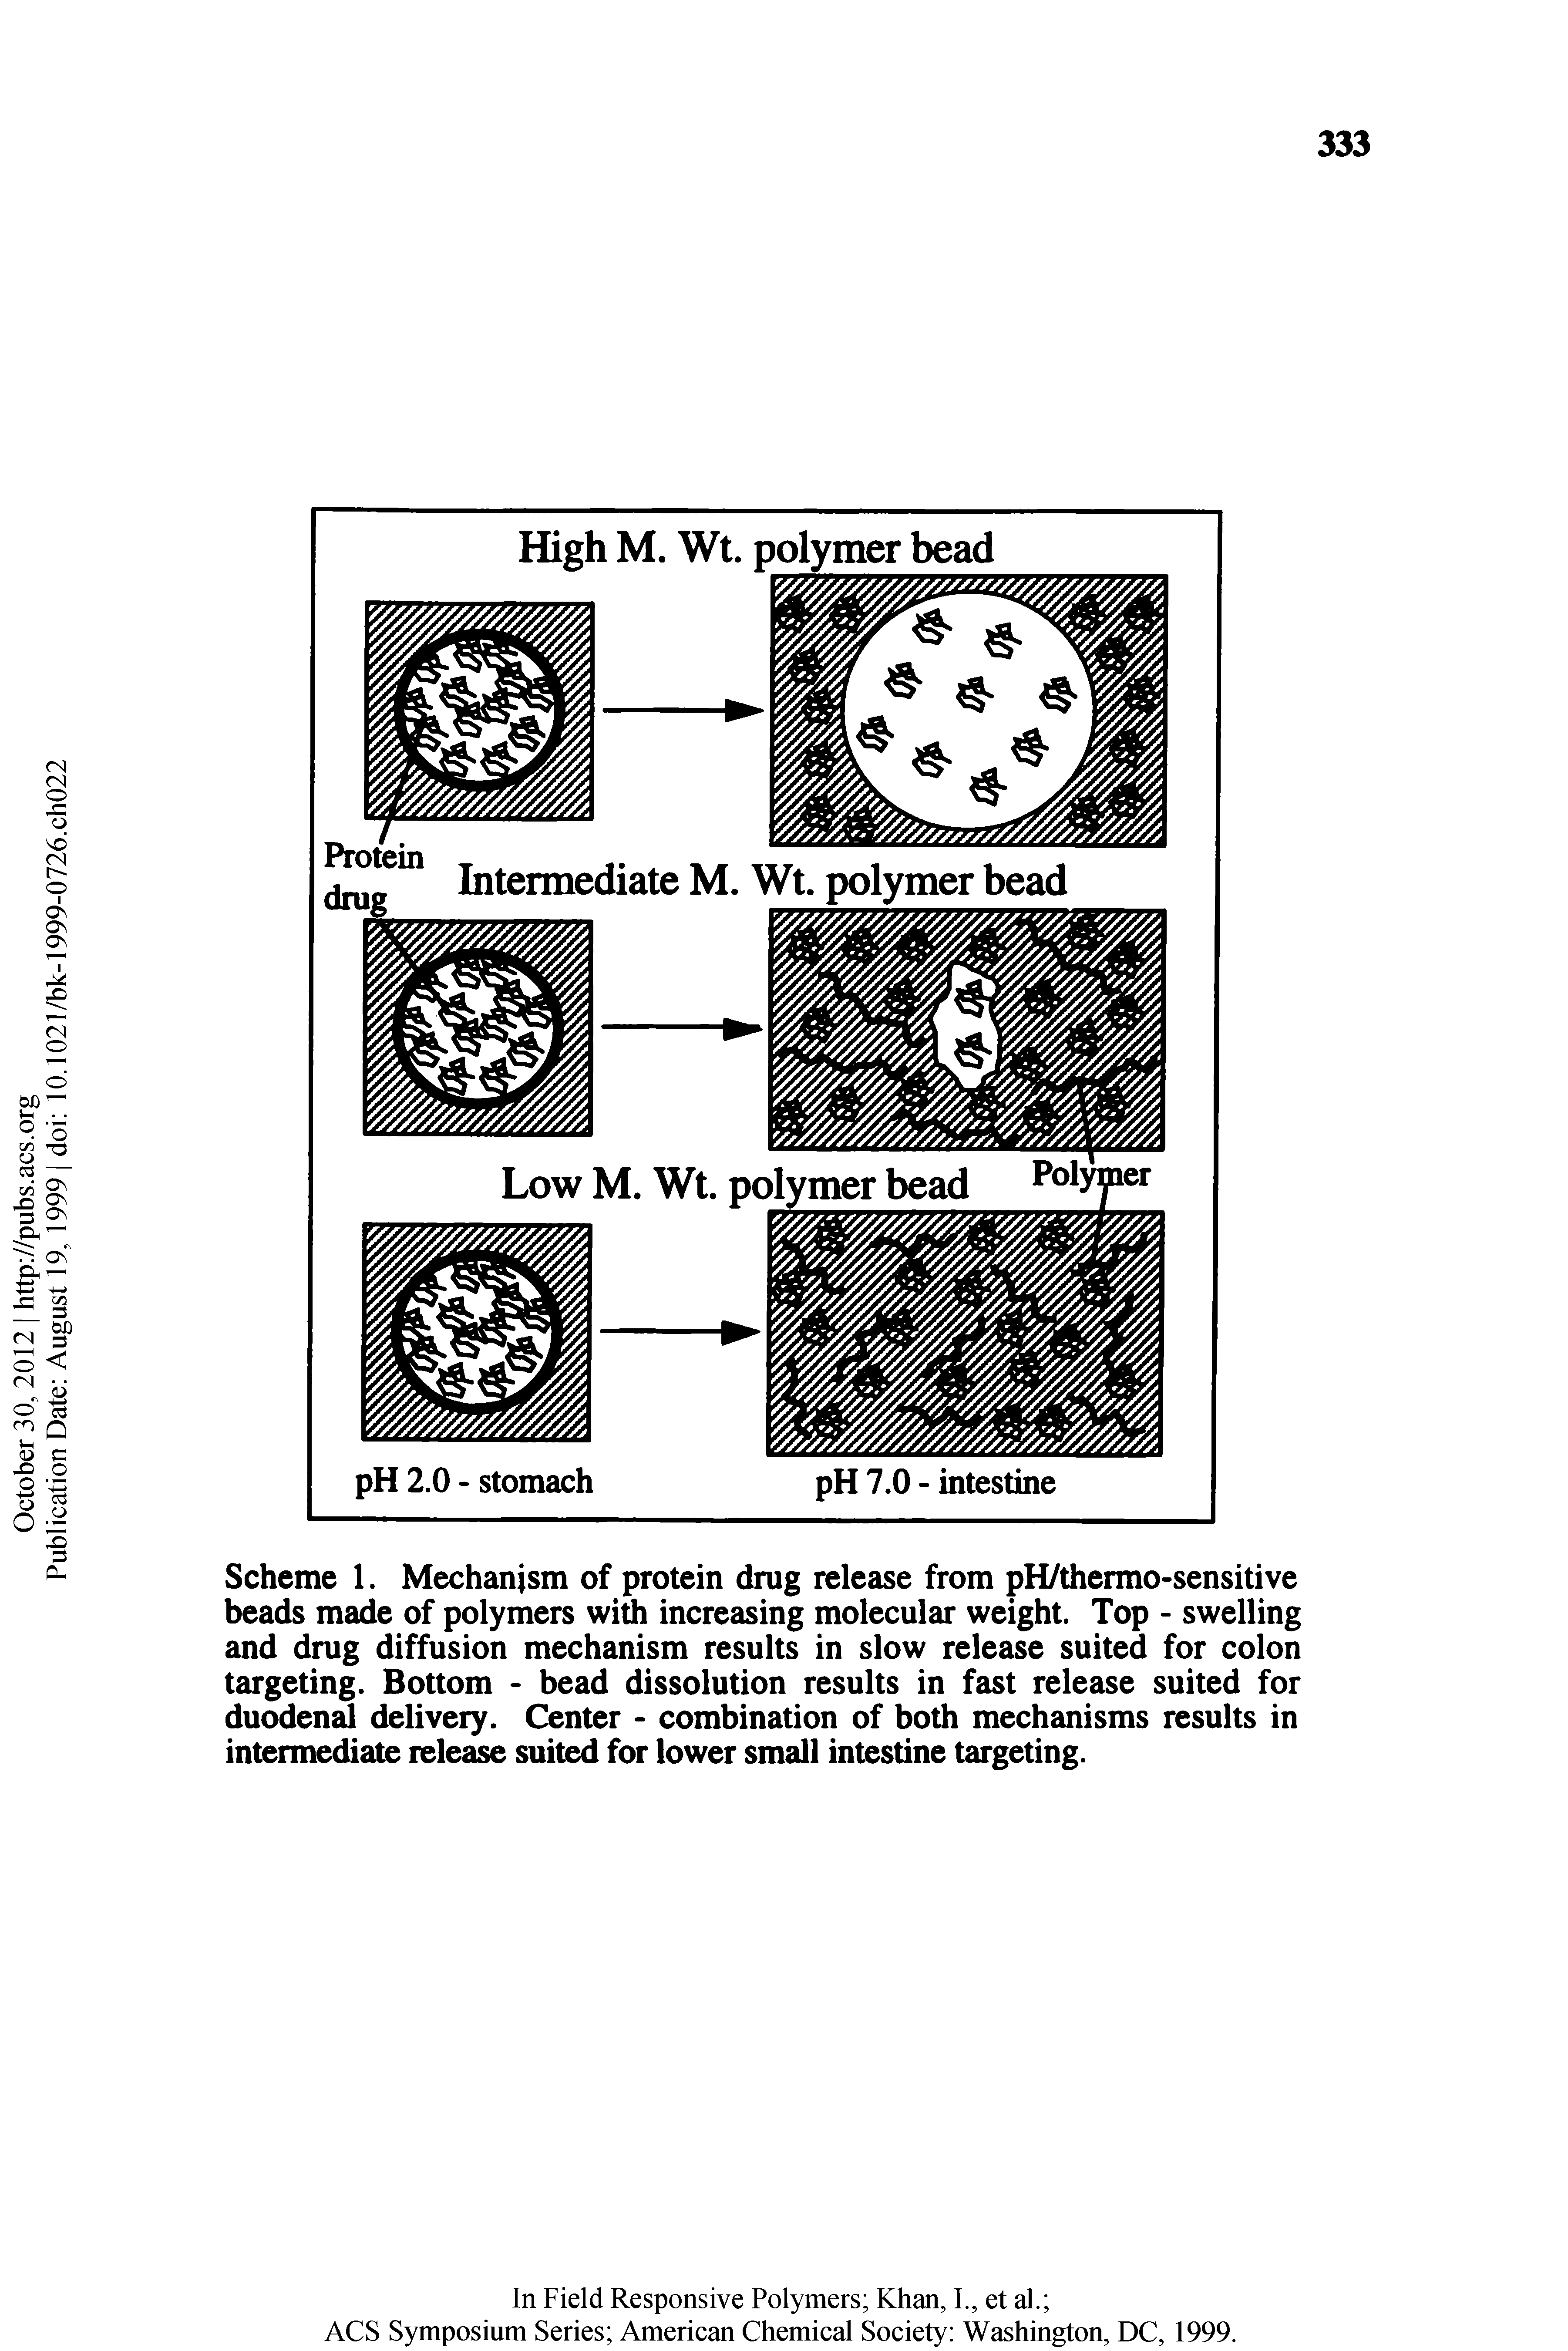 Scheme 1. Mechanism of protein drug release from pH/thermo-sensitive beads made of polymers with increasing molecular weight. Top - swelling and drug diffusion mechanism results in slow release suited for colon targeting. Bottom - bead dissolution results in fast release suited for duoden delivery. Center - combination of both mechanisms results in intermediate release suited for lower small intestine targeting.